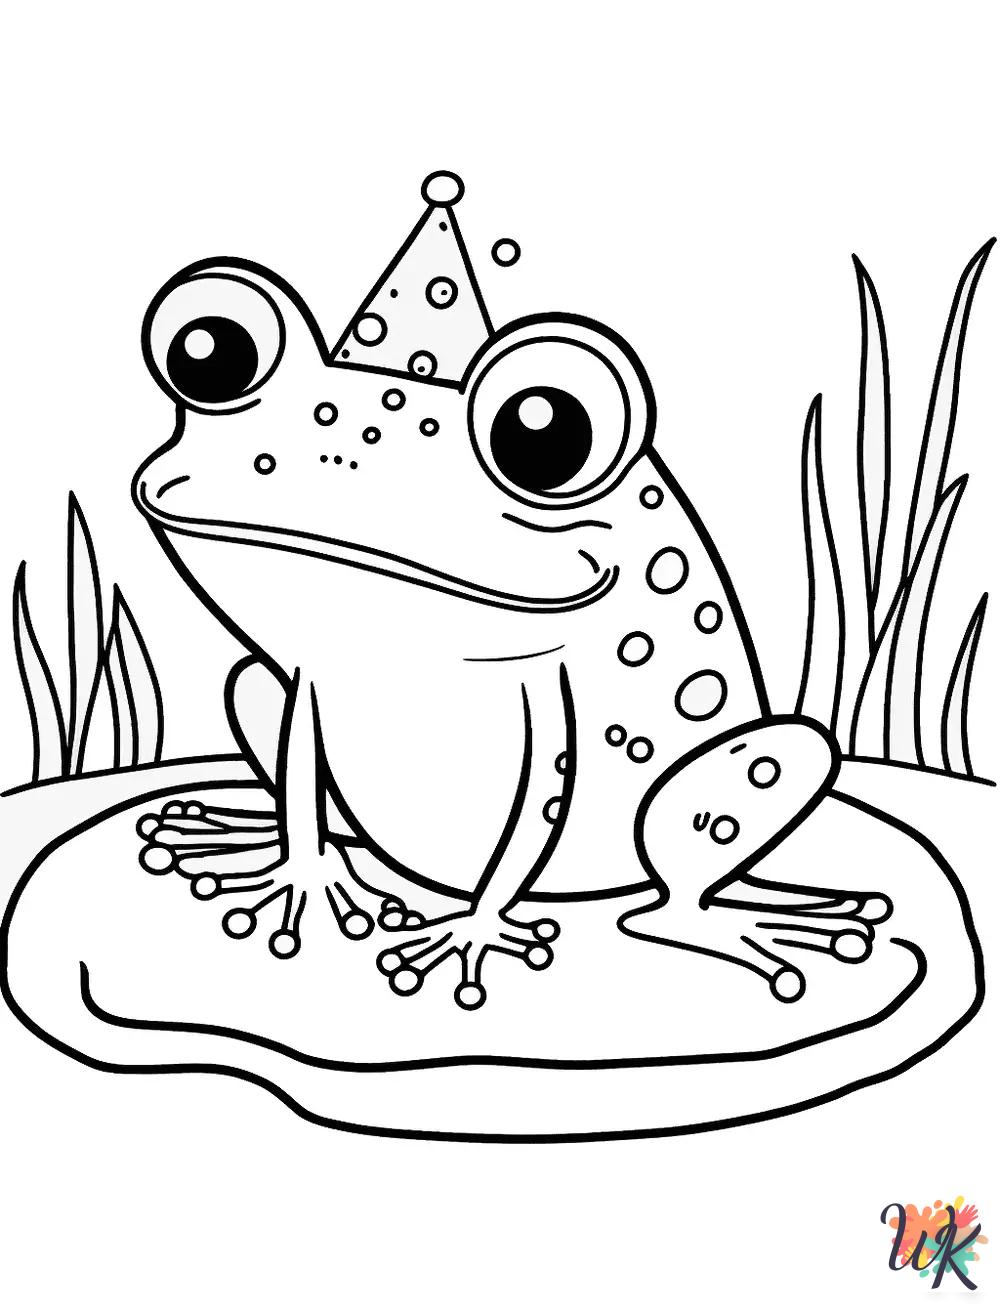 Frog decorations coloring pages 2